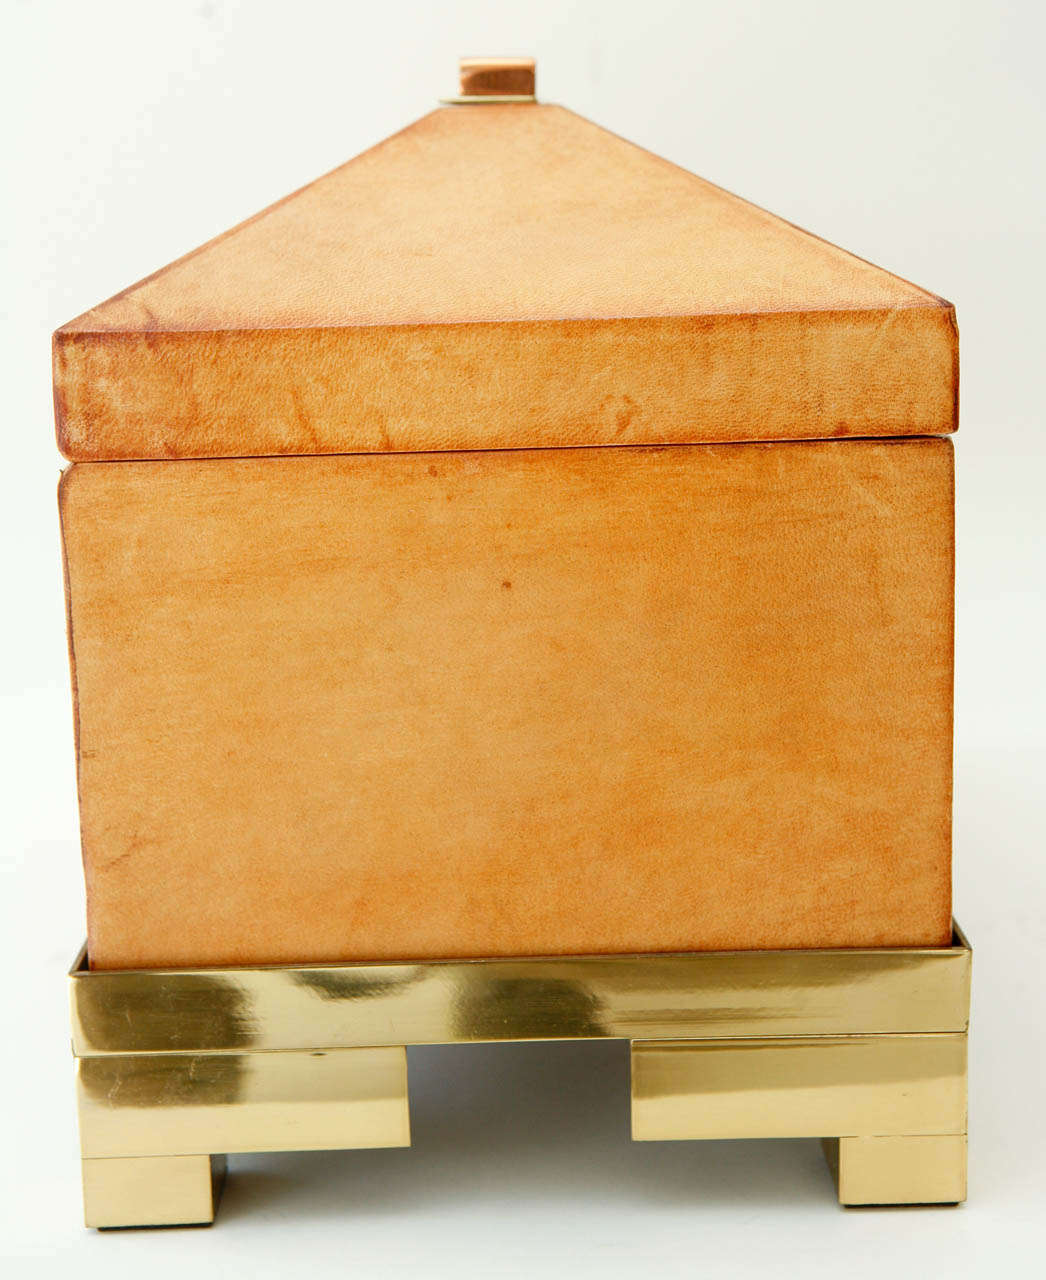 Patinated Leather Box with a Brass Base 2